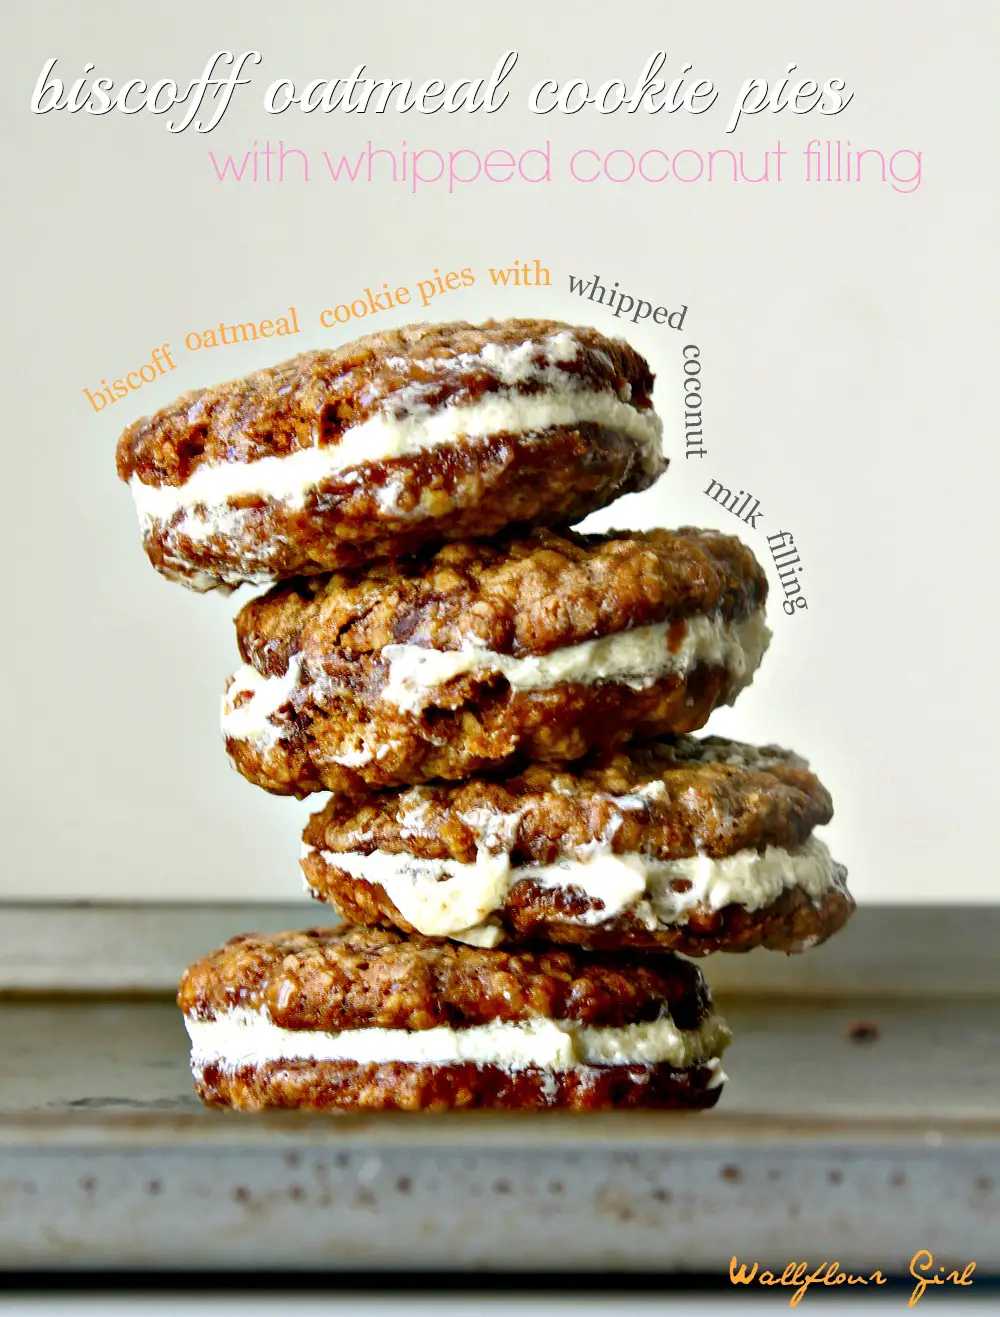 Biscoff Oatmeal Cookie Pies with Whipped Coconut Filling 12--042414